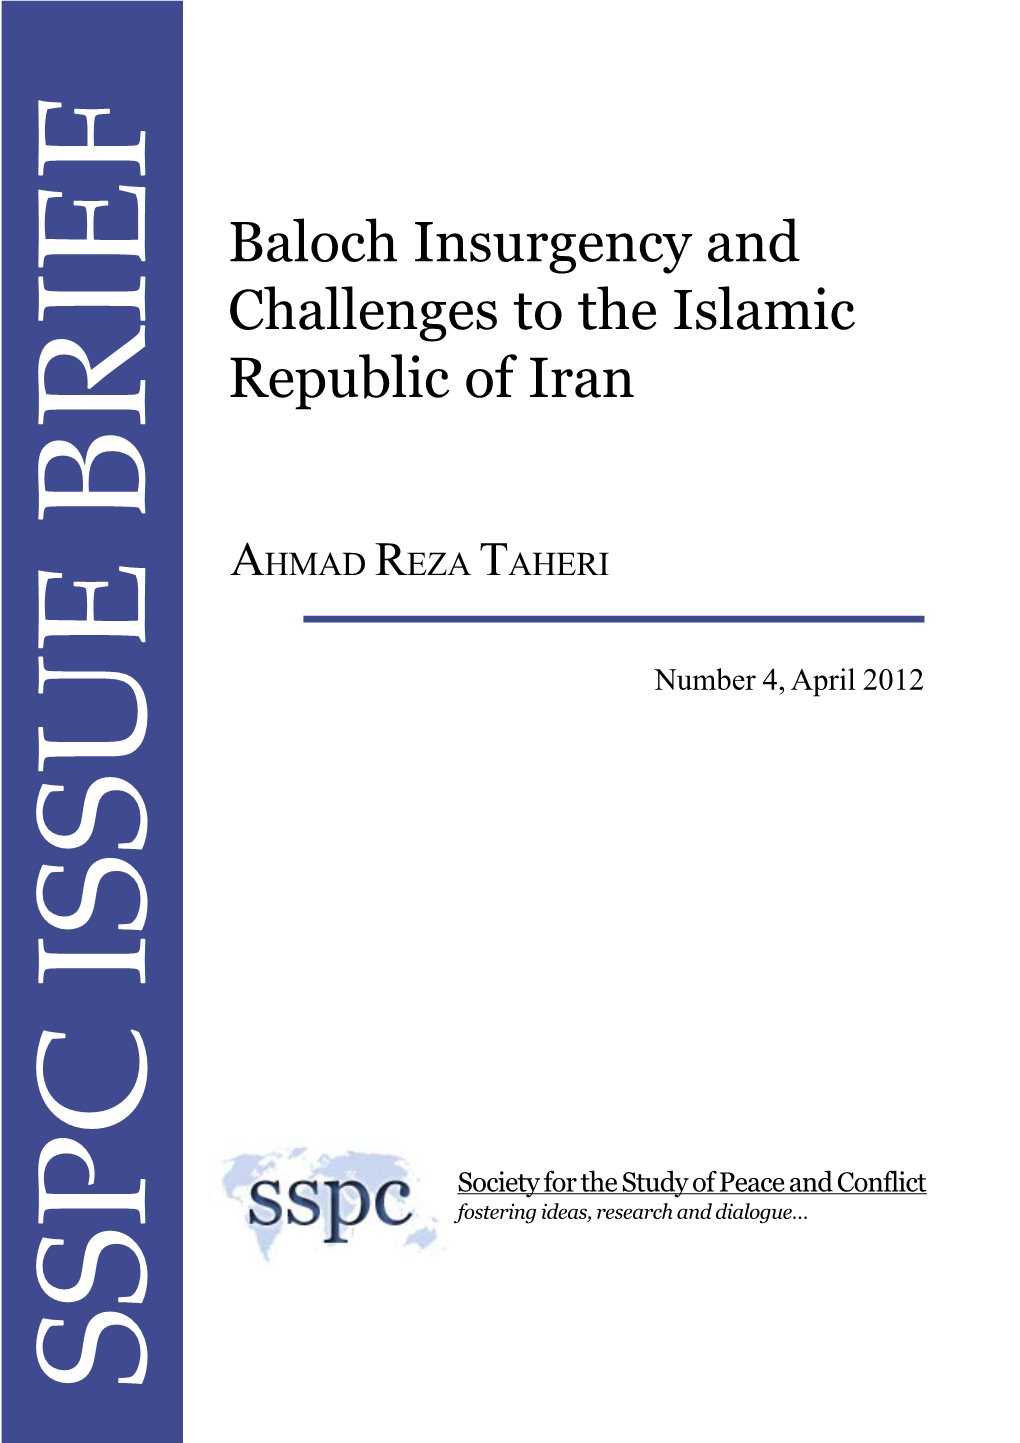 Baloch Insurgency and Challenges to the Islamic Republic of Iran